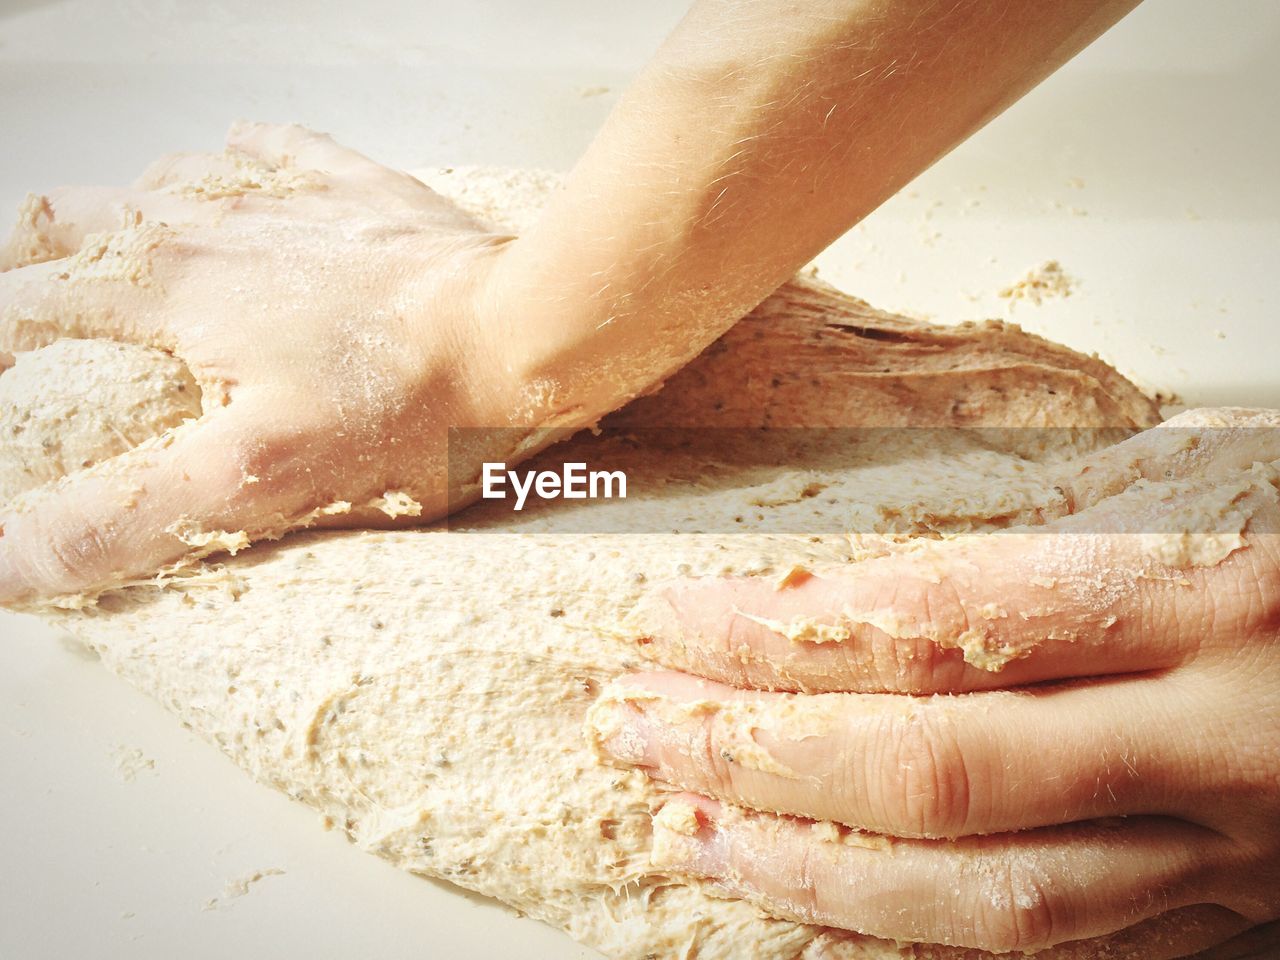 Cropped image of person kneading dough